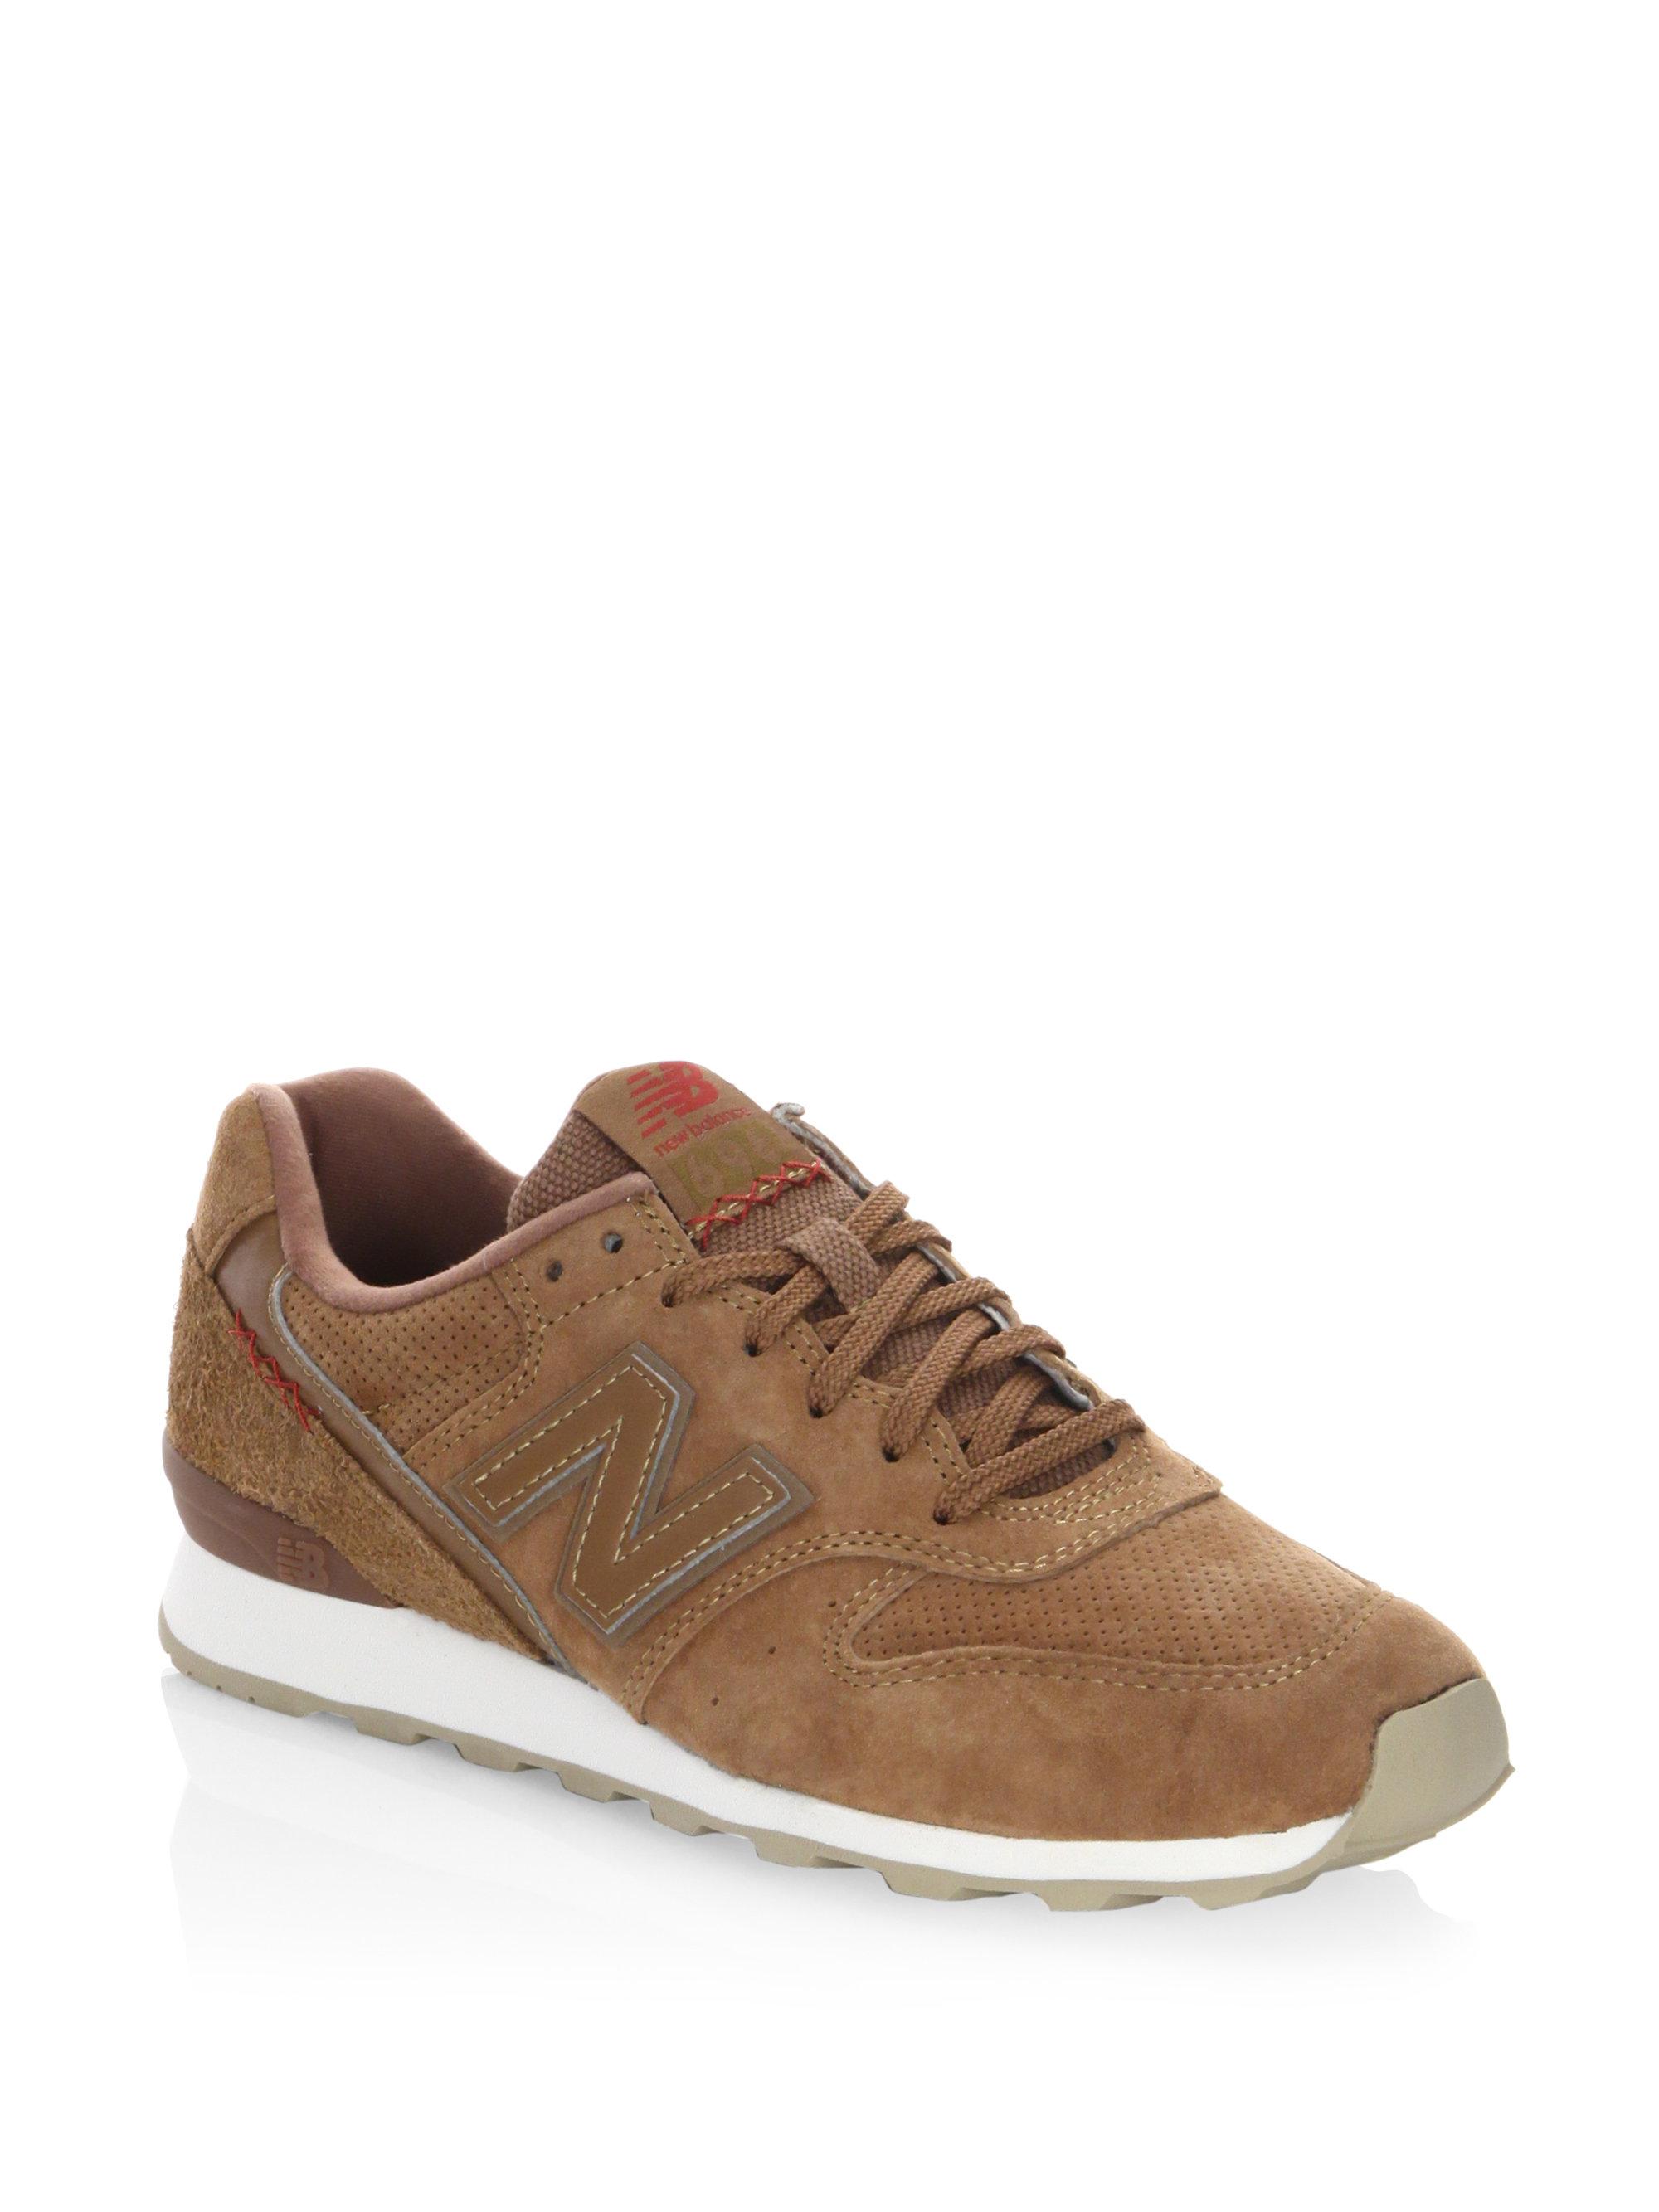 New Balance 696 Suede Sneakers in 